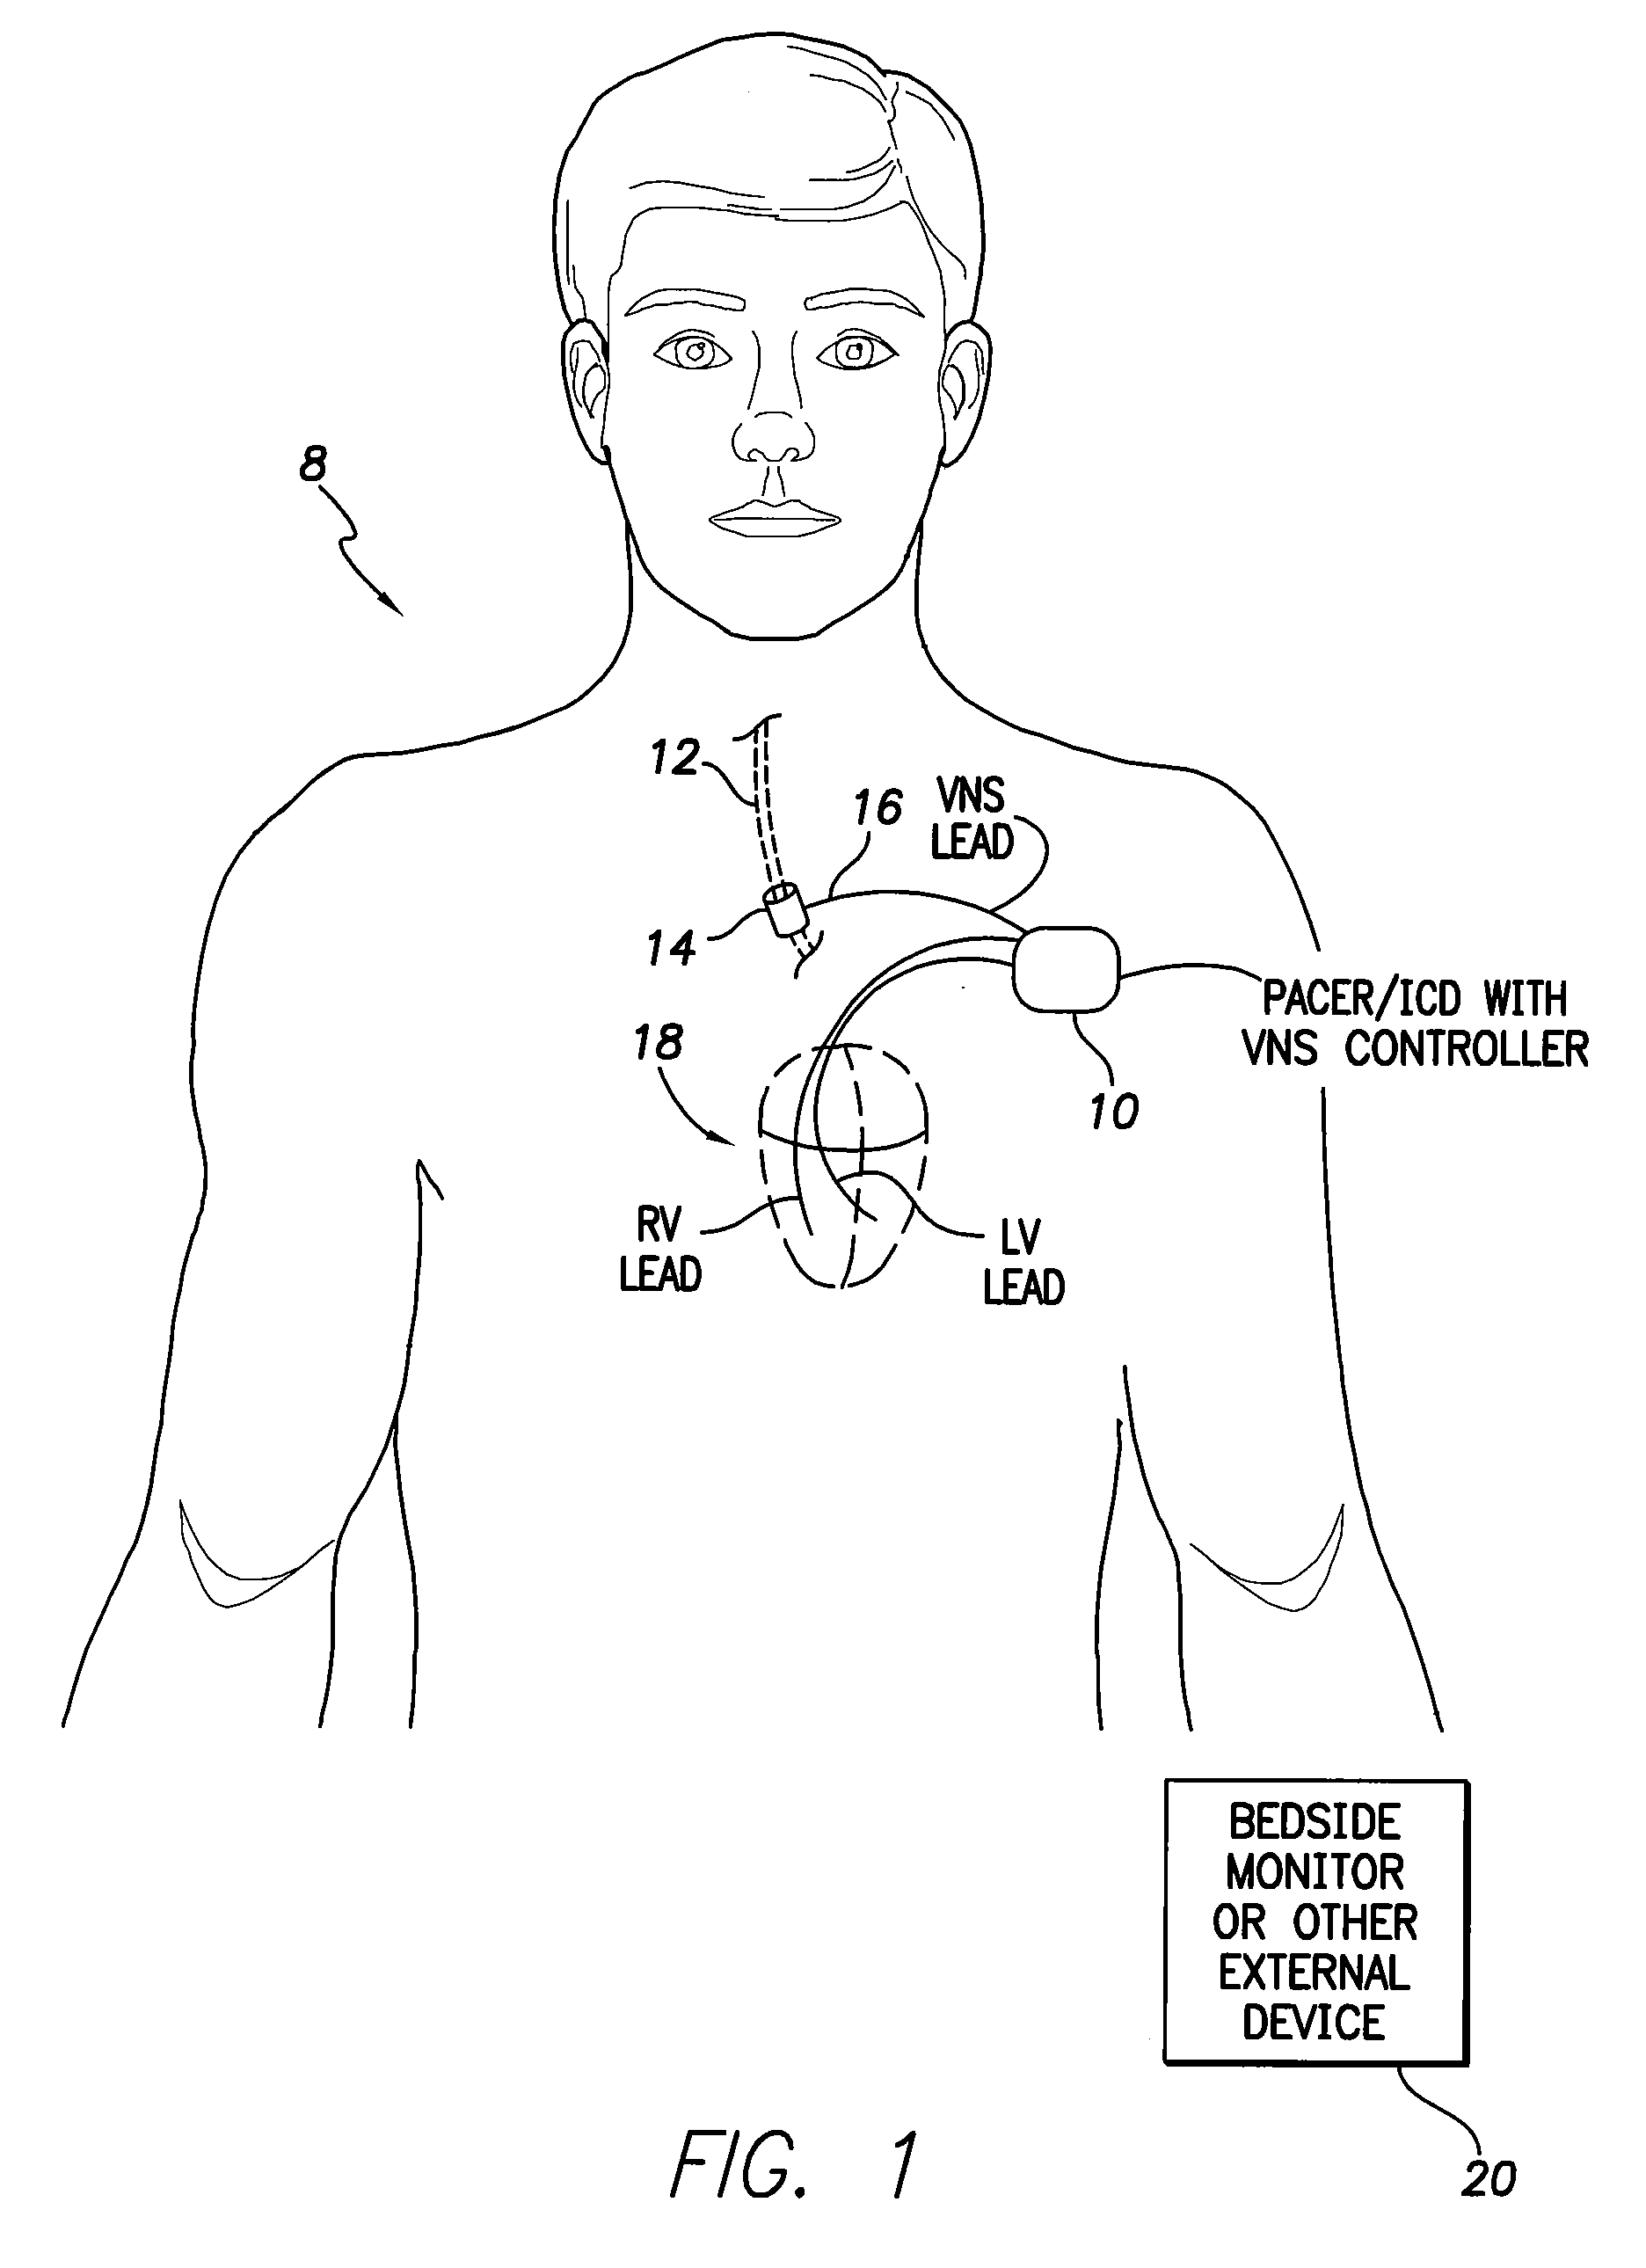 Systems and Methds for Use by an Implantable Medical Device for Controlling Vagus Nerve Stimulation Based on Heart Rate Reduction Curves and Thresholds to Mitigate Heart Failure